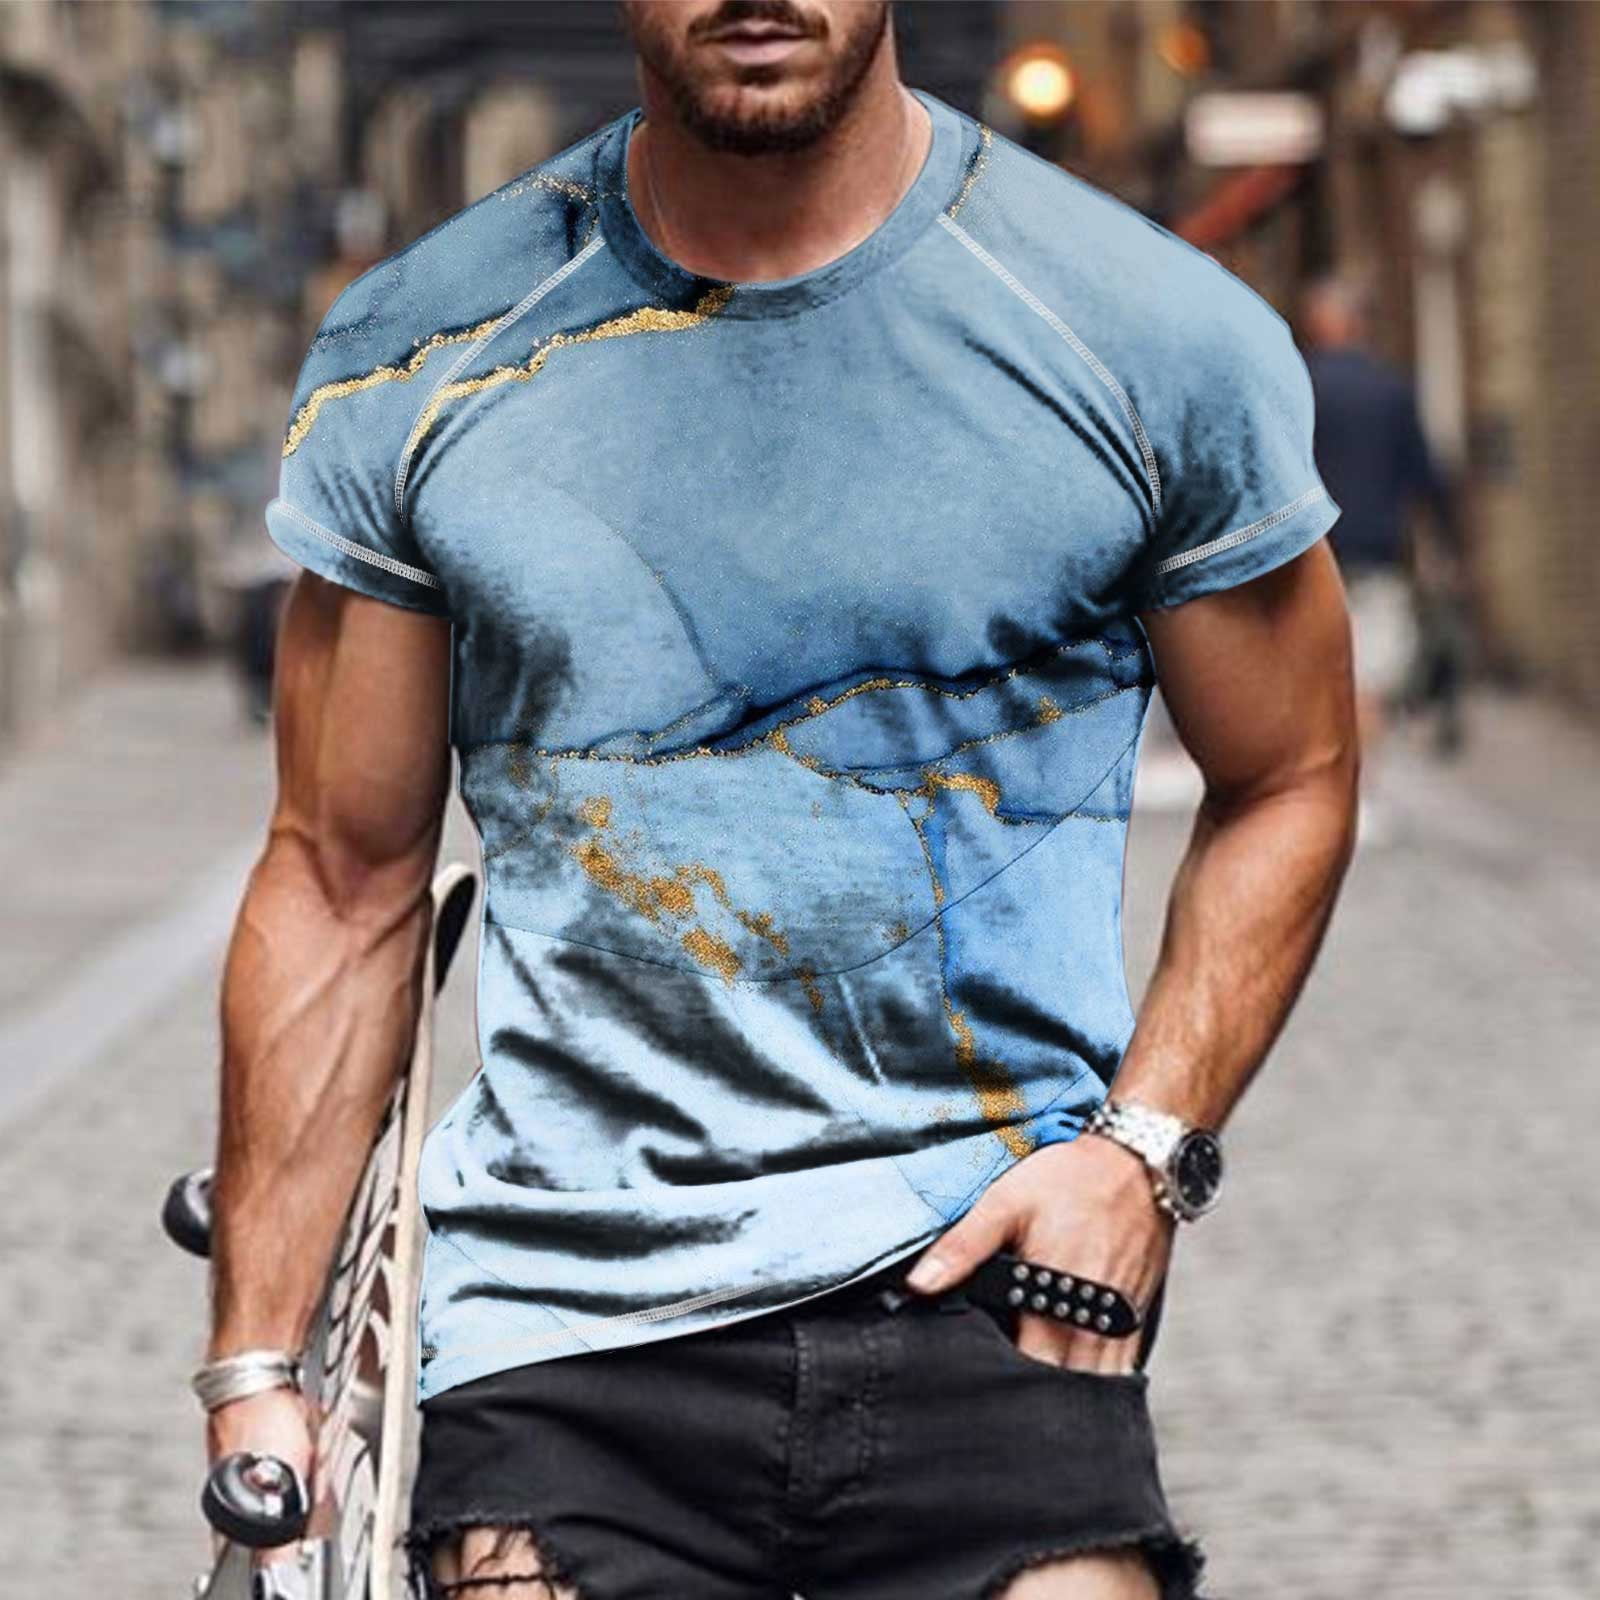 Best Shirts For Bodybuilders - Tees for bodybuilders – Jacked Jeans